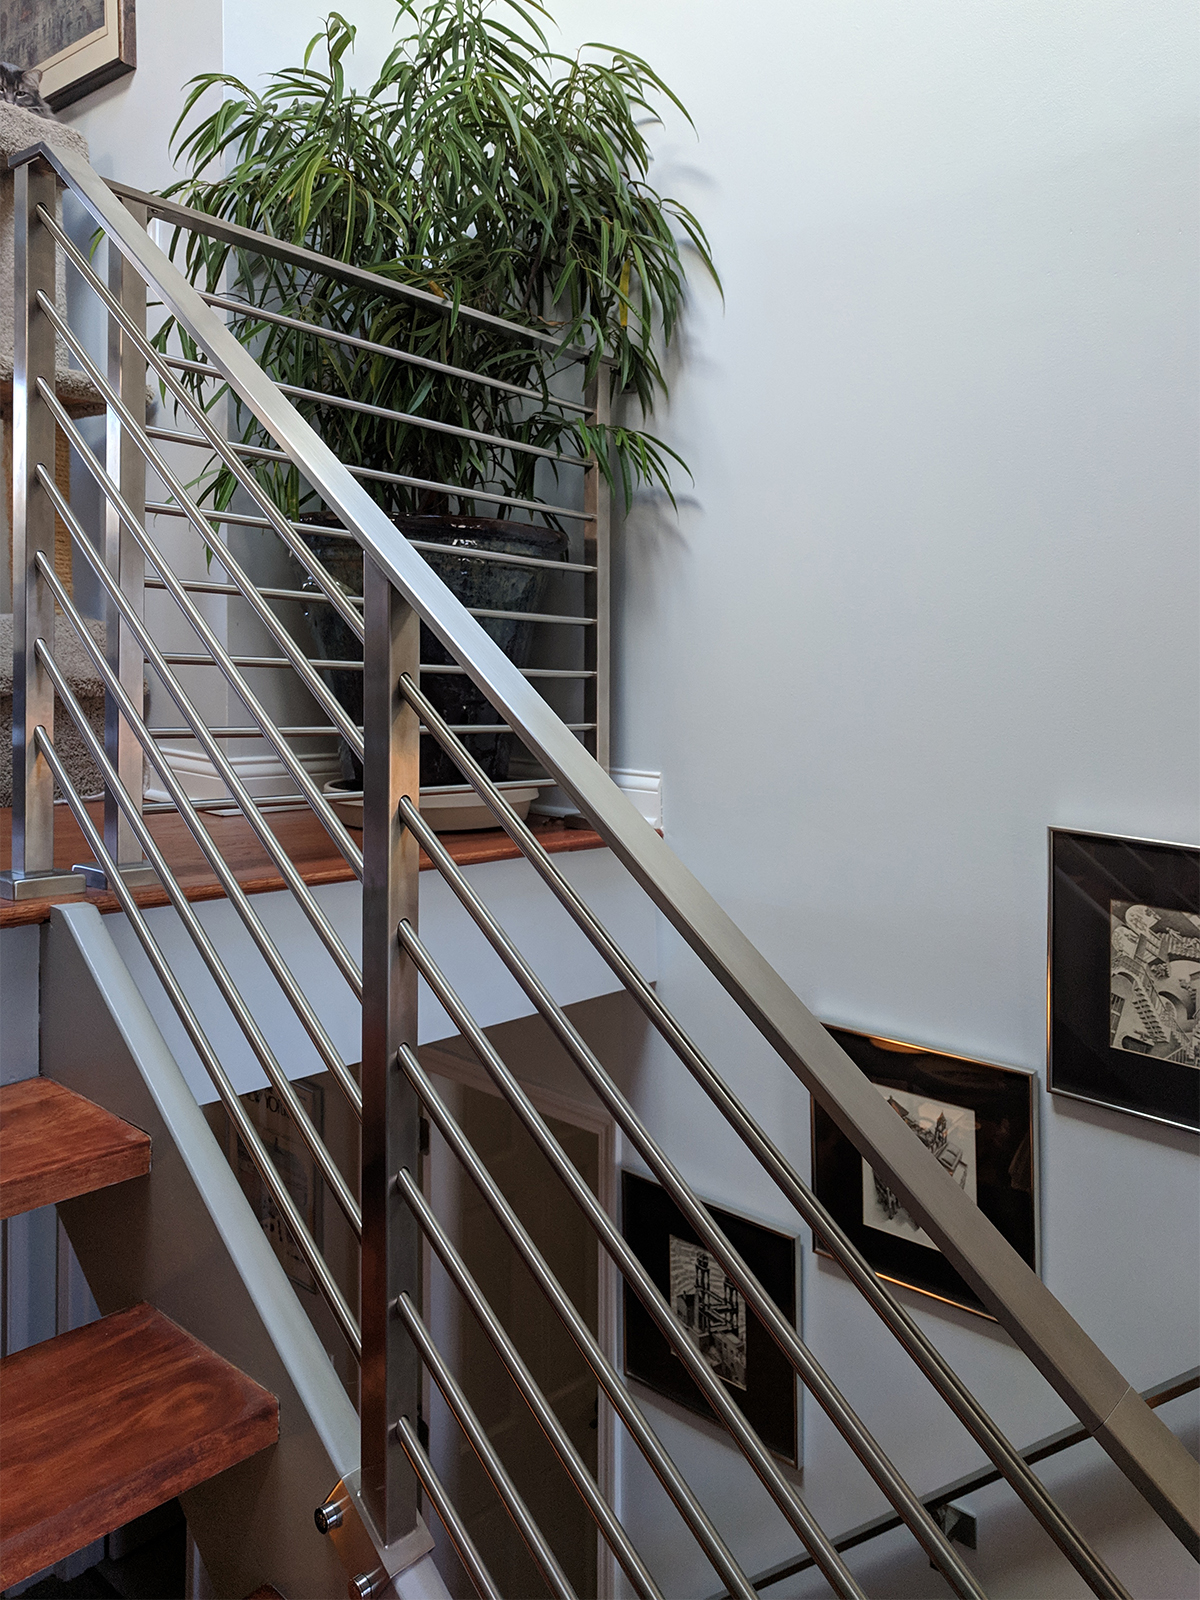 Review image, after AGS Stainless stair rail installation.